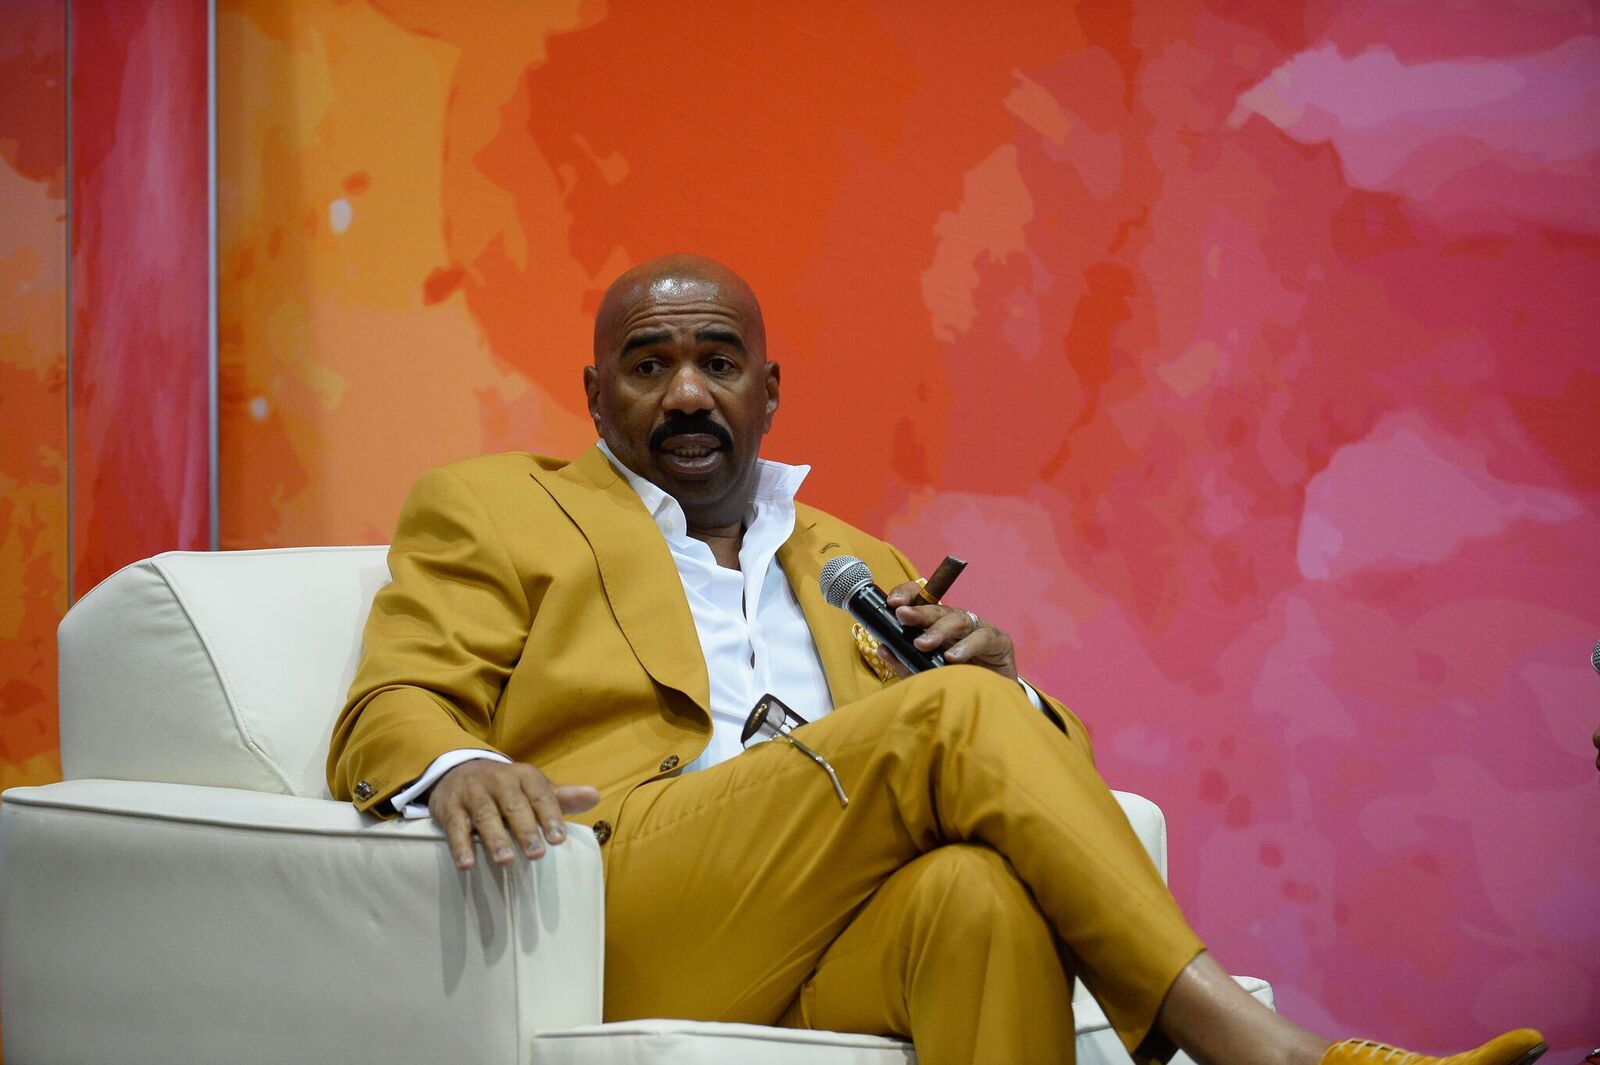 Television personality and host Steve Harvey speaks at the State Farm Color Full Lives Art Gallery during the 2016 State Farm Neighborhood Awards at Mandalay Bay Resort and Casino on July 22, 2016 | Photo: Getty Images